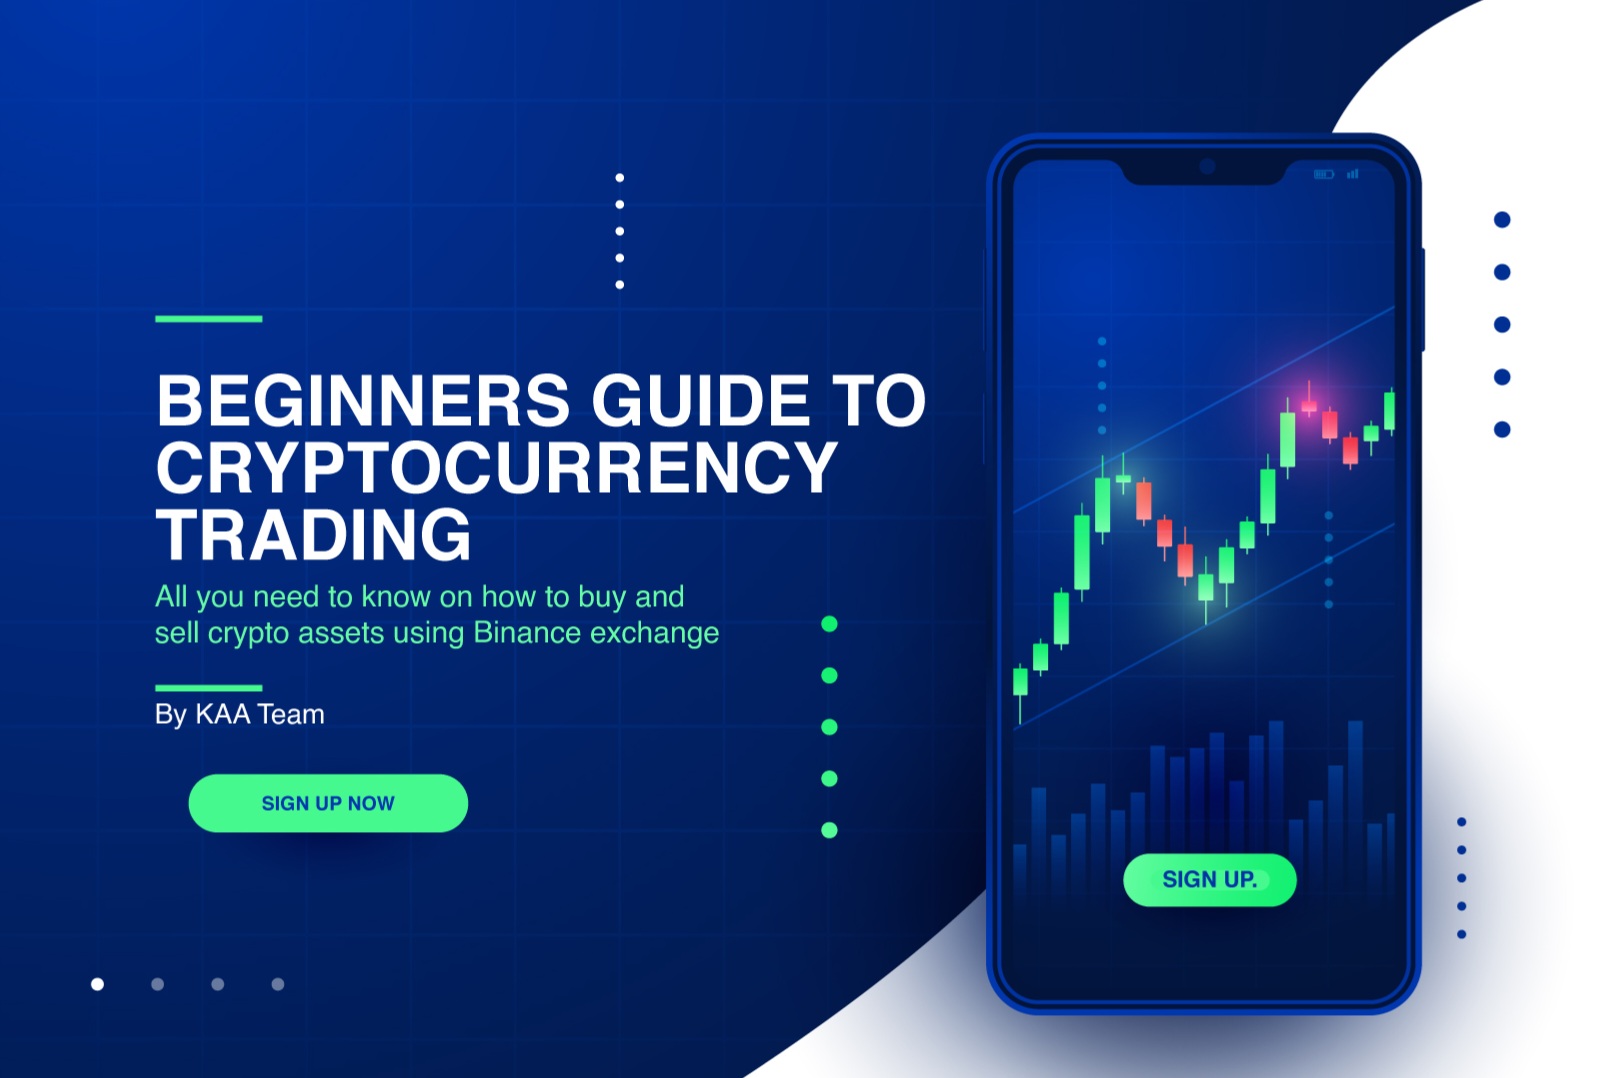 BEGINNERS GUIDE TO CRYPTOCURRENCY TRADING-All you need to know on how to  buy and sell all crypto assets using Binance Exchnage.